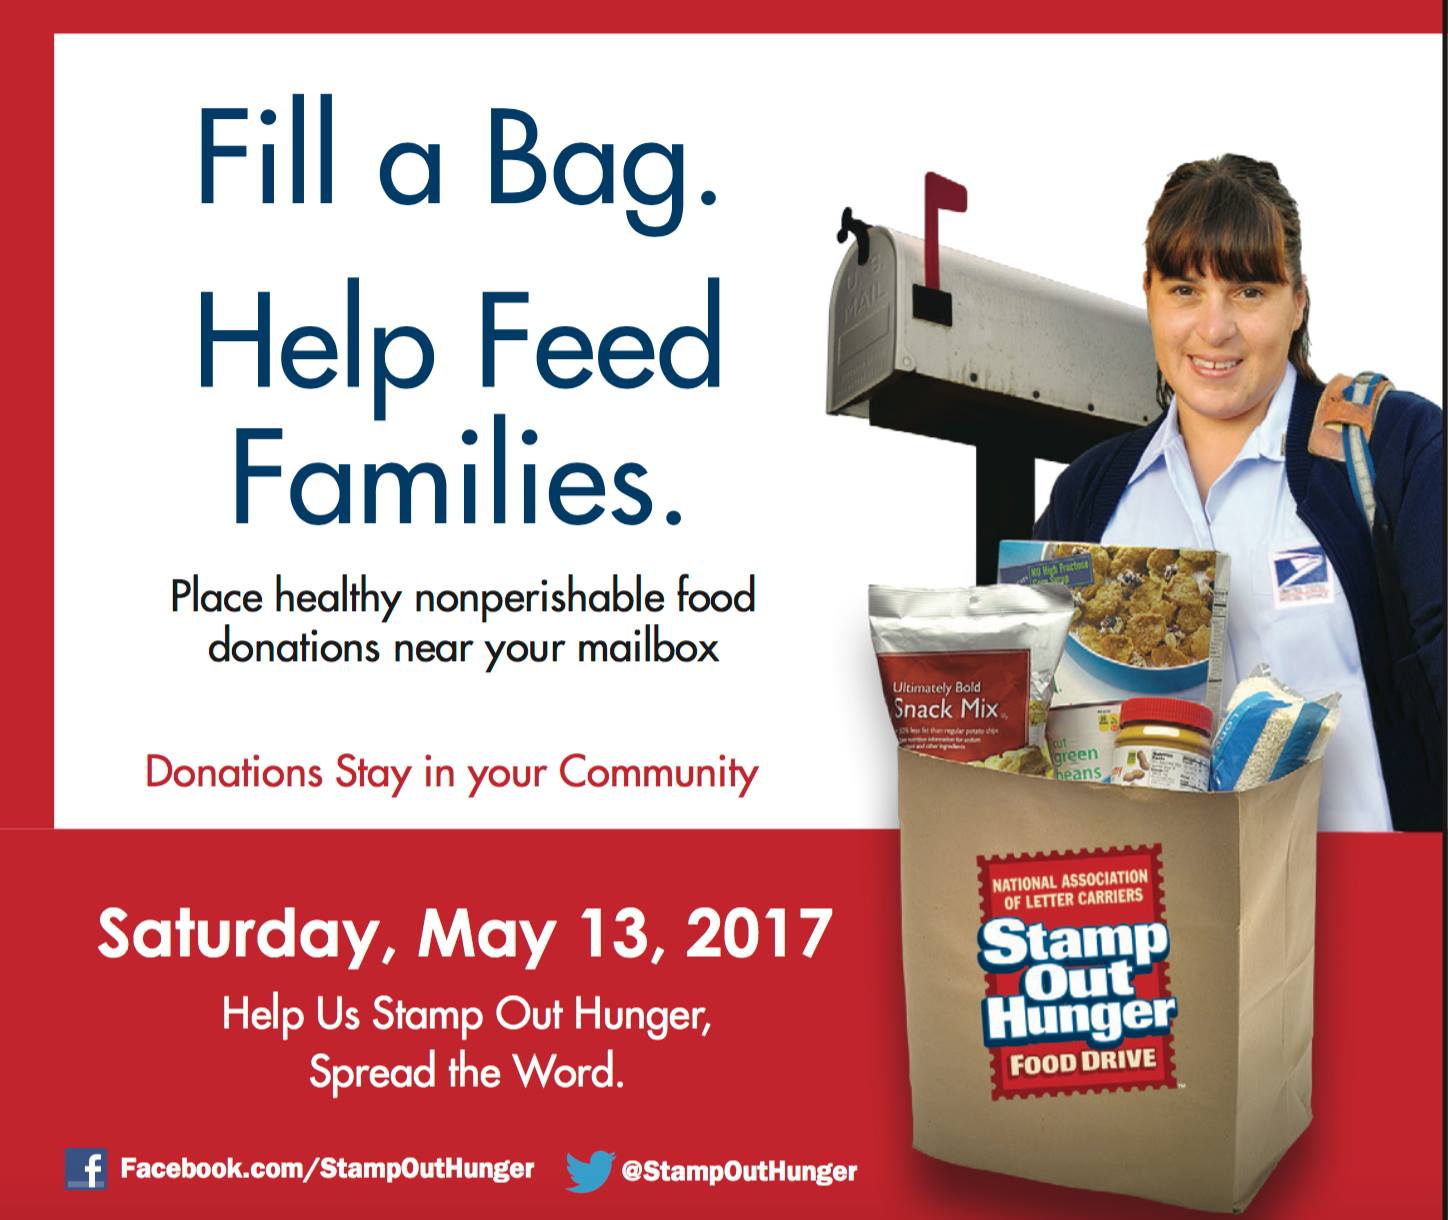 Post Office Food Drive on Saturday May 13th. Leave NonPerishable Foods